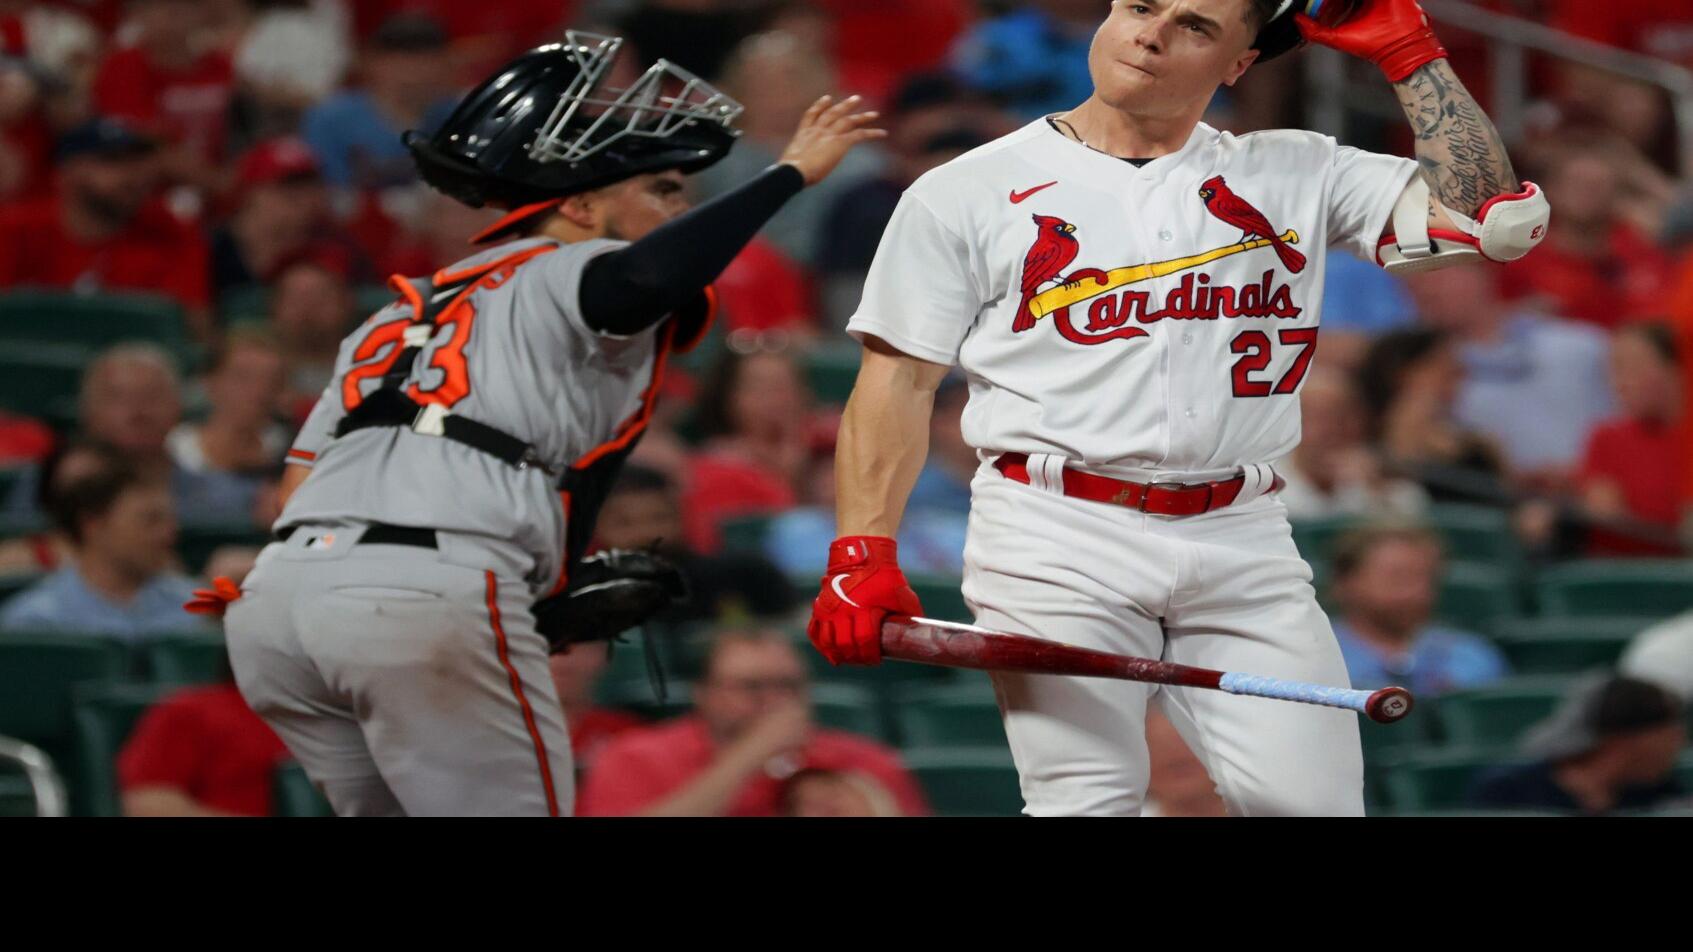 O'Neill loses arbitration case with Cardinals; Walsh up, Whitley down